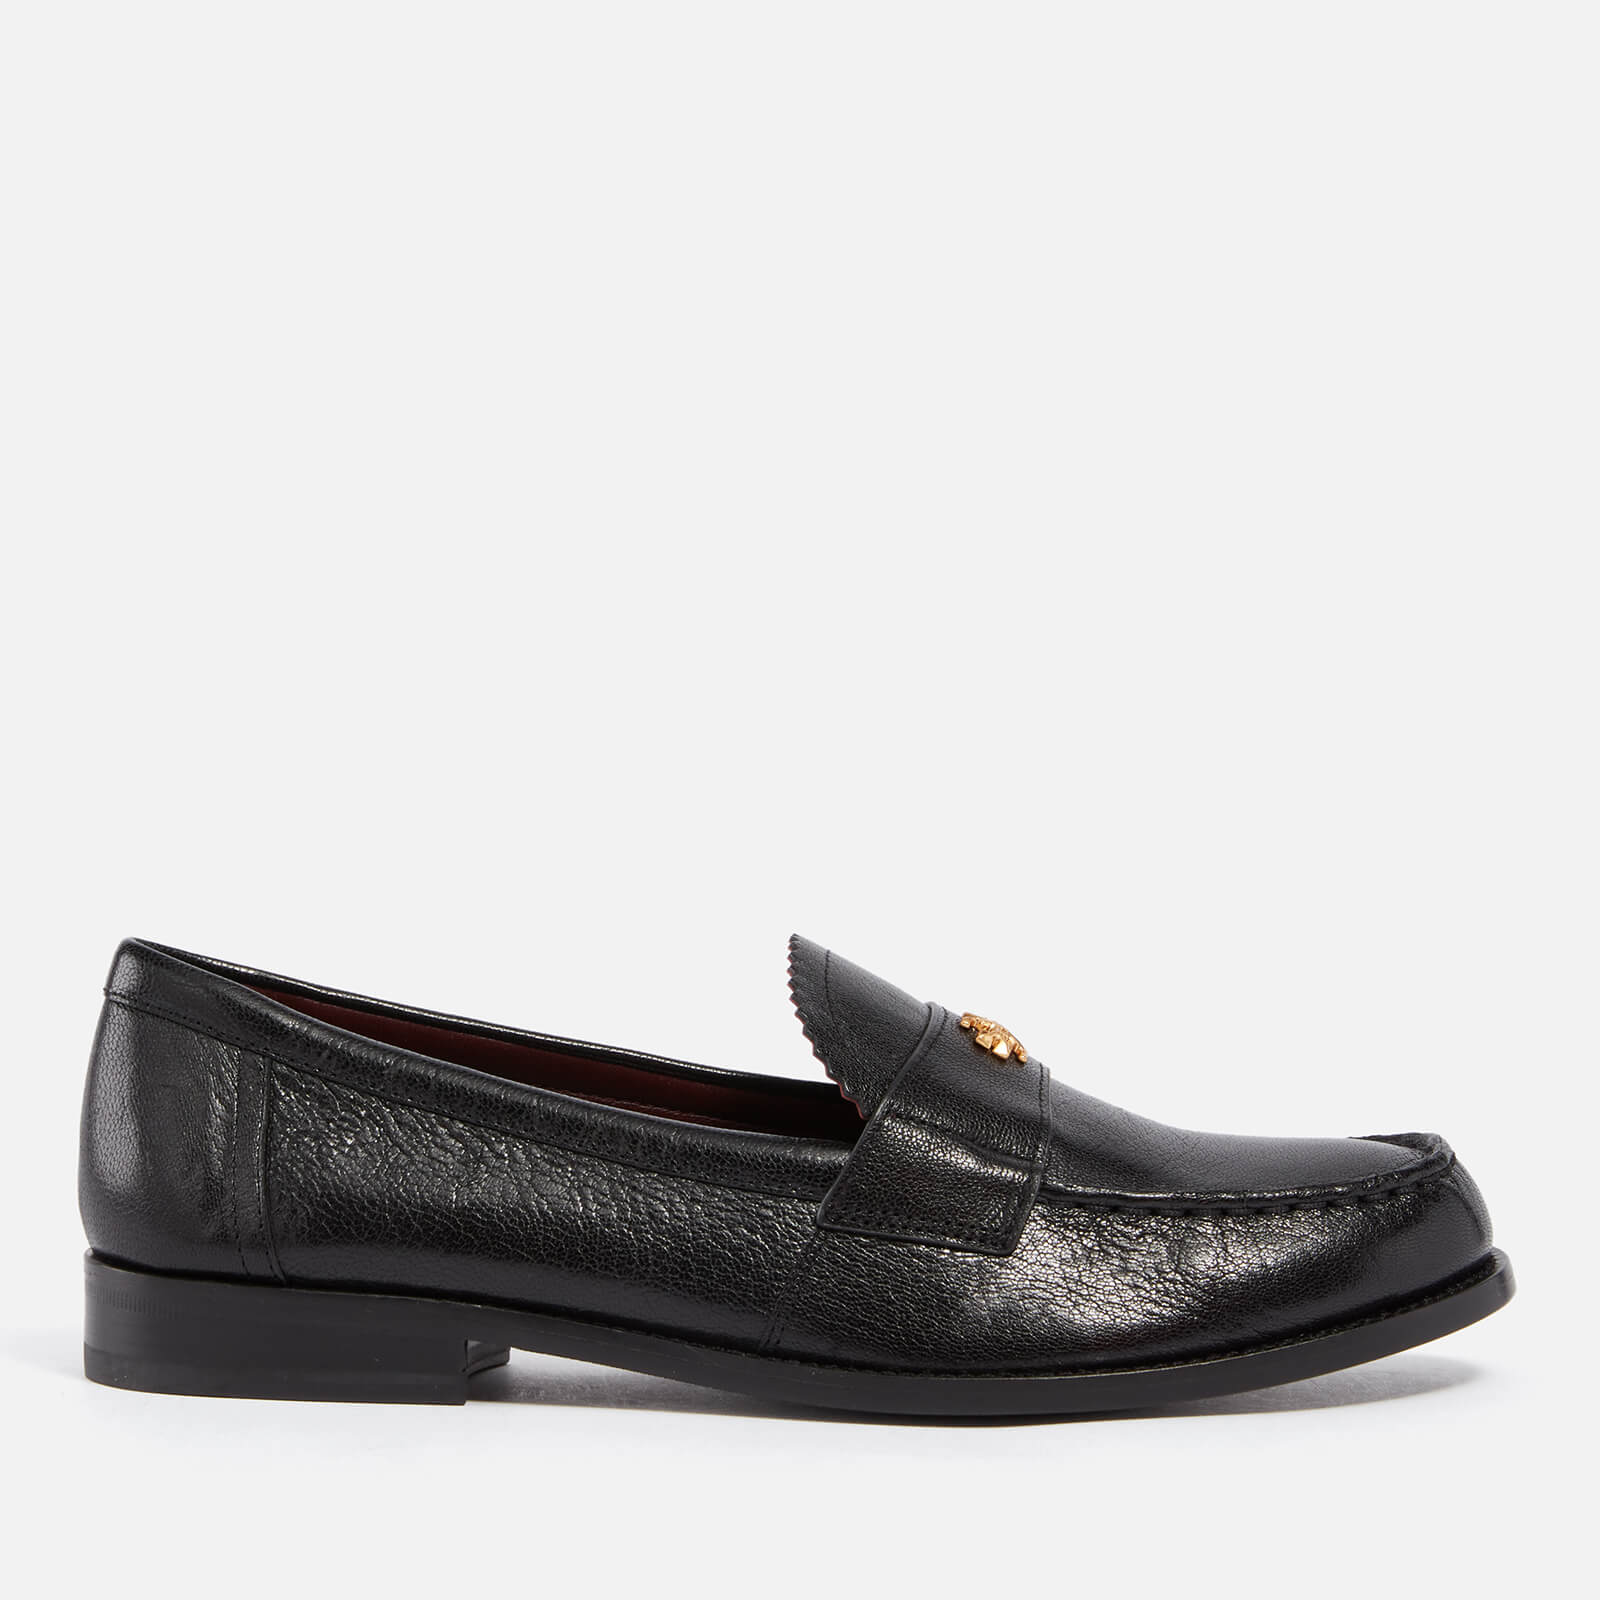 Tory Burch Women’s Perry Leather Loafers